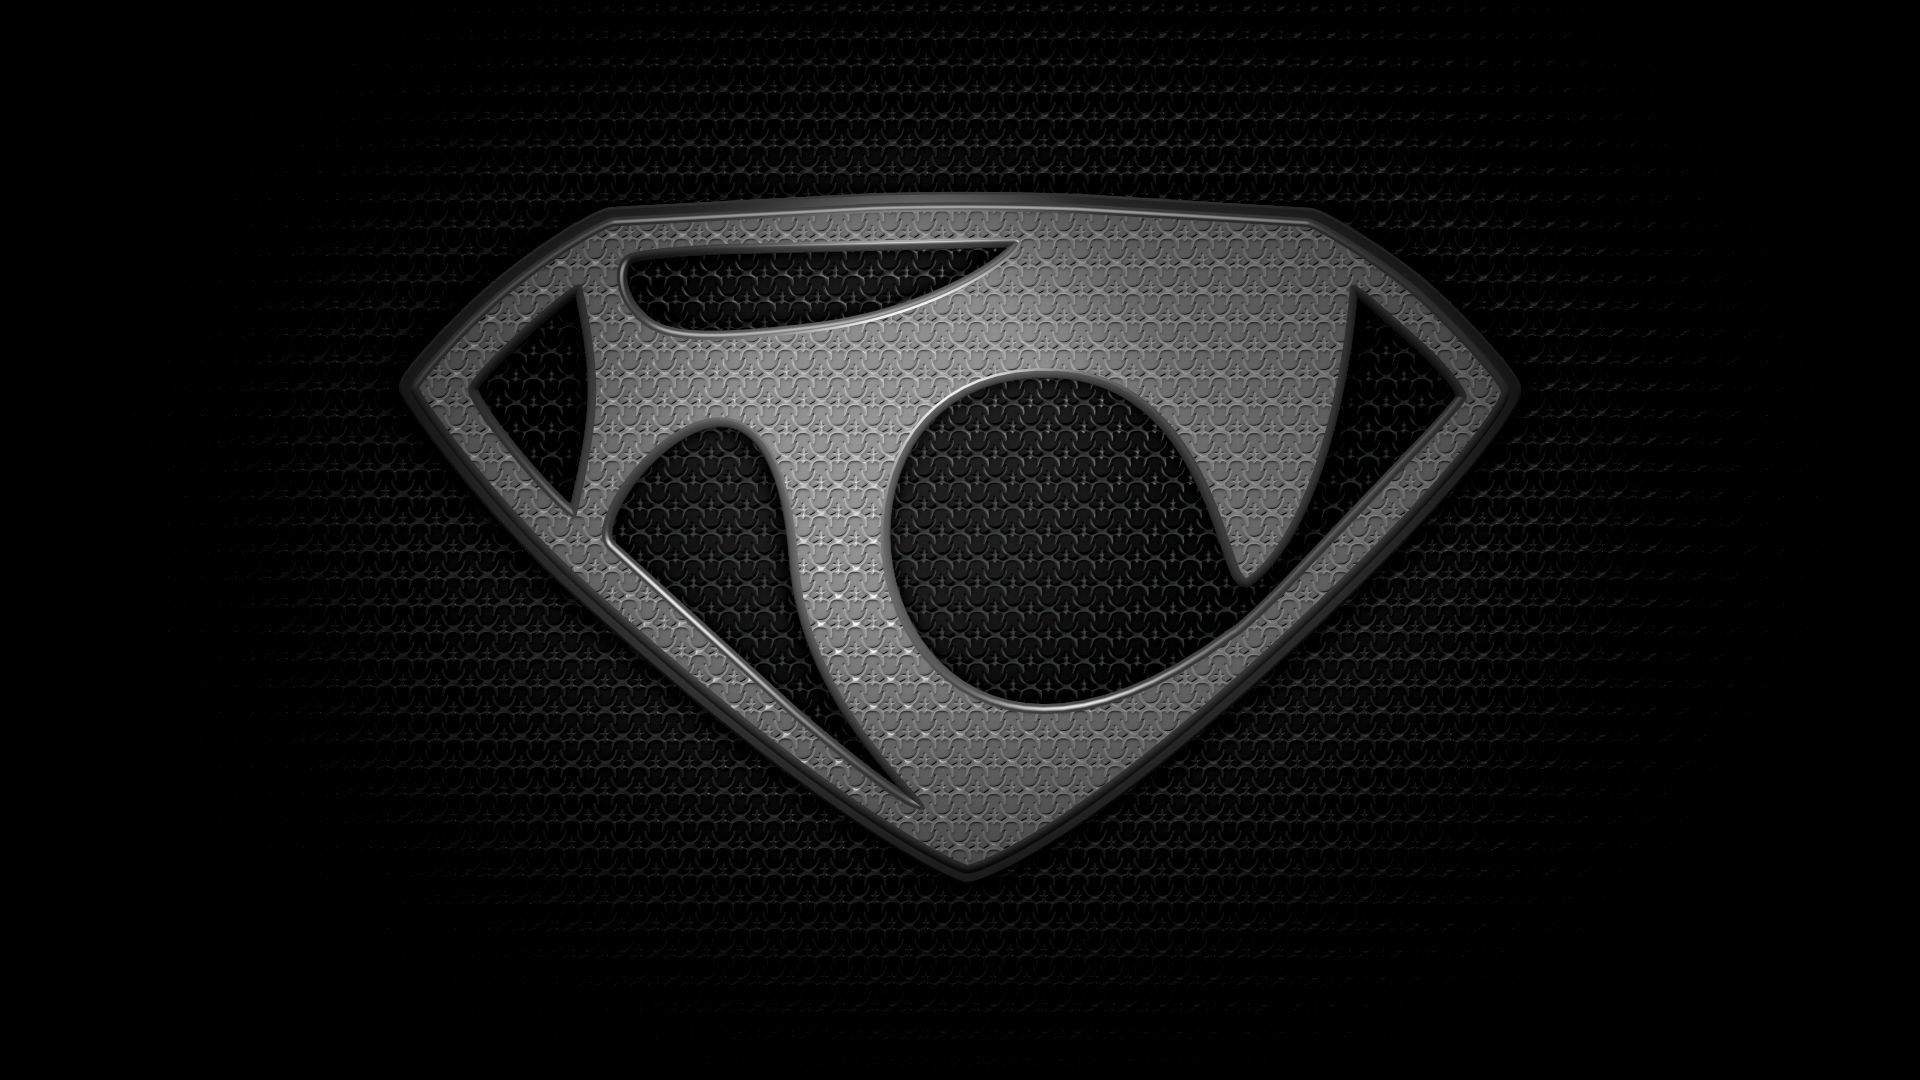 1920x1080 Kal-El's glyph from "Man of Steel" | DC Universe Logos | Pinterest | DC  Universe and Comic